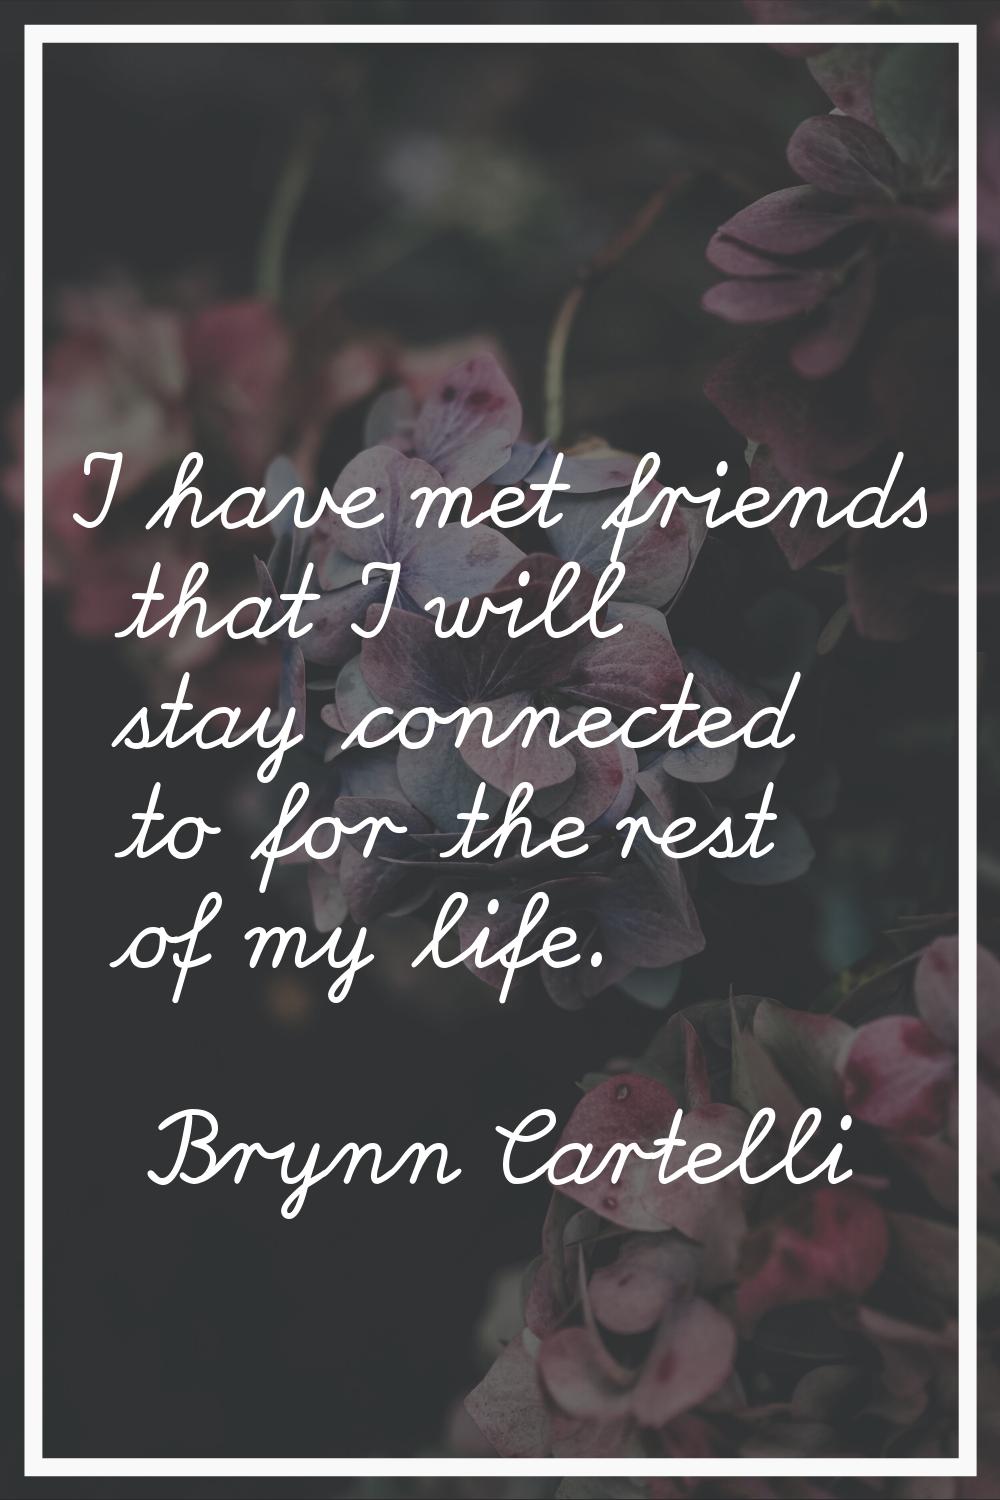 I have met friends that I will stay connected to for the rest of my life.